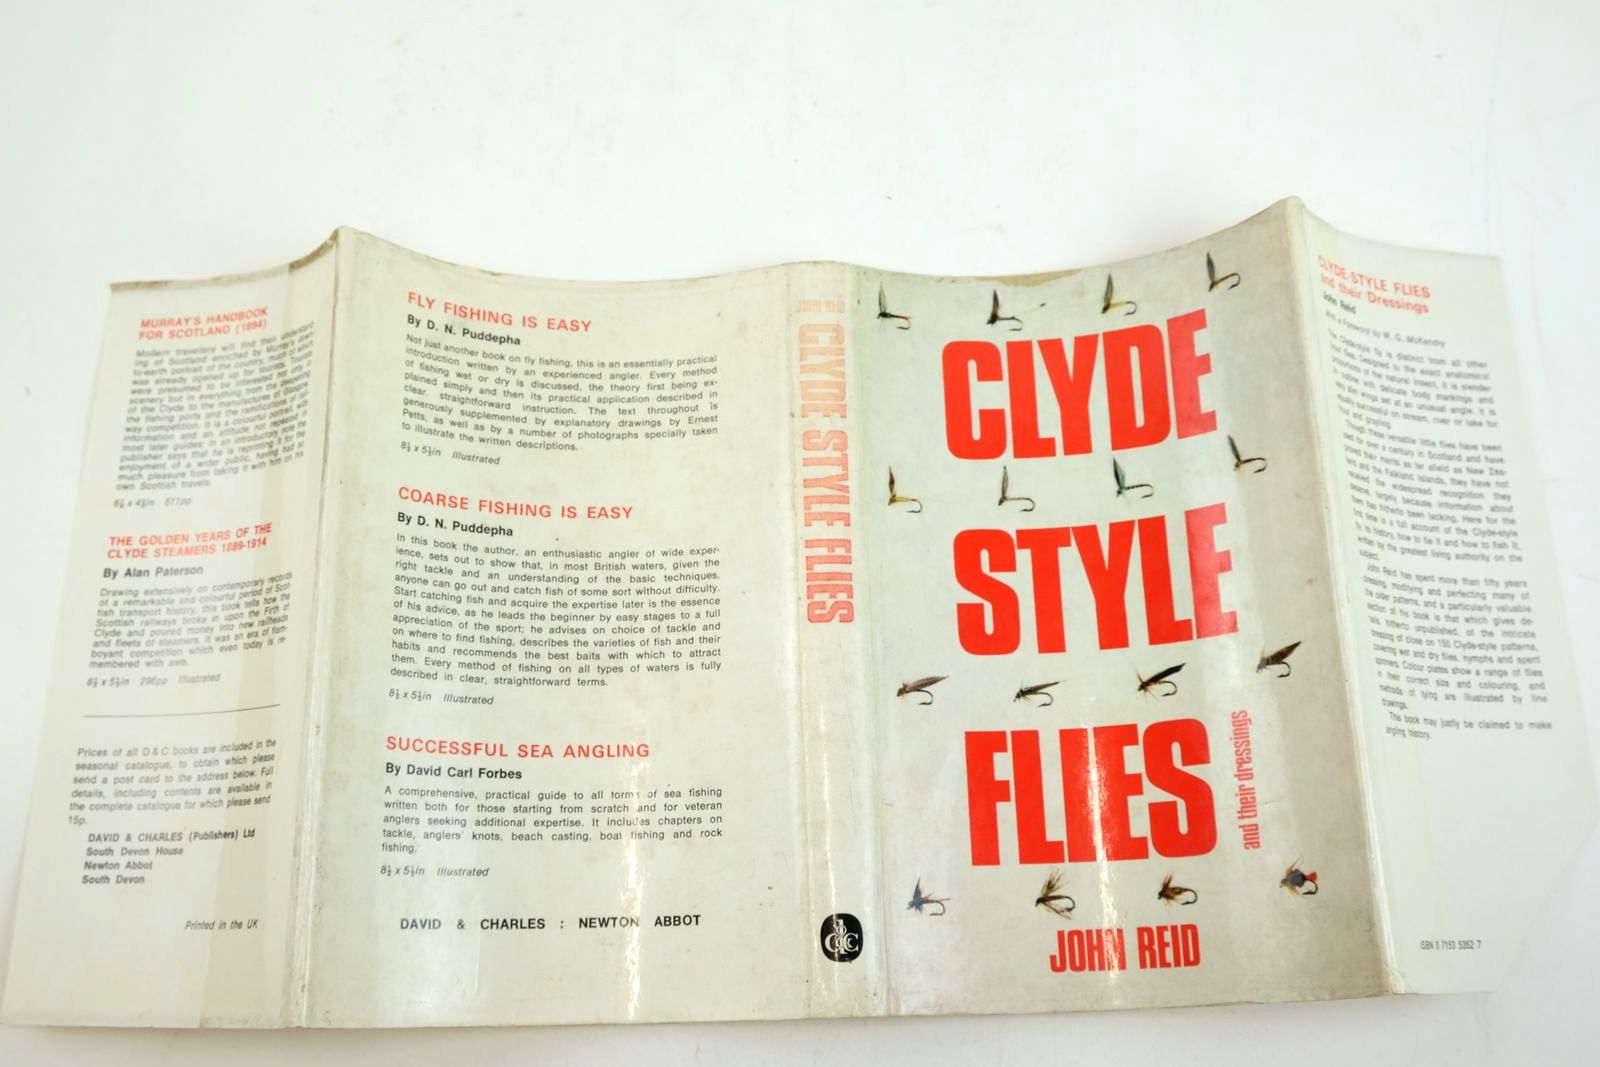 Photo of CLYDE-STYLE FLIES AND THEIR DRESSINGS written by Reid, John
McKendry, William G. published by David & Charles (STOCK CODE: 2135214)  for sale by Stella & Rose's Books